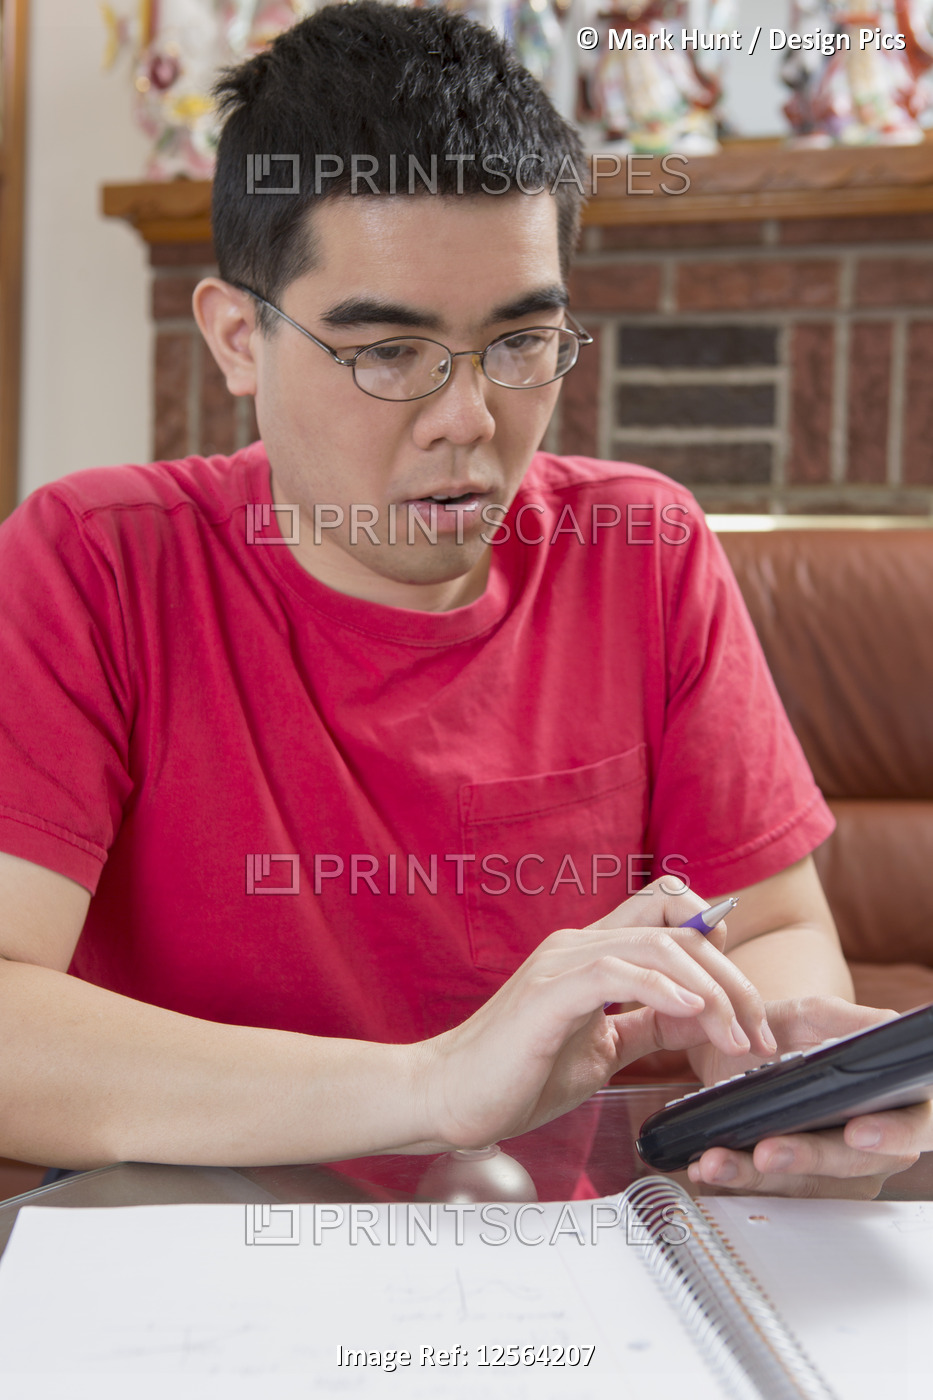 Asian man with Autism working on his cell phone